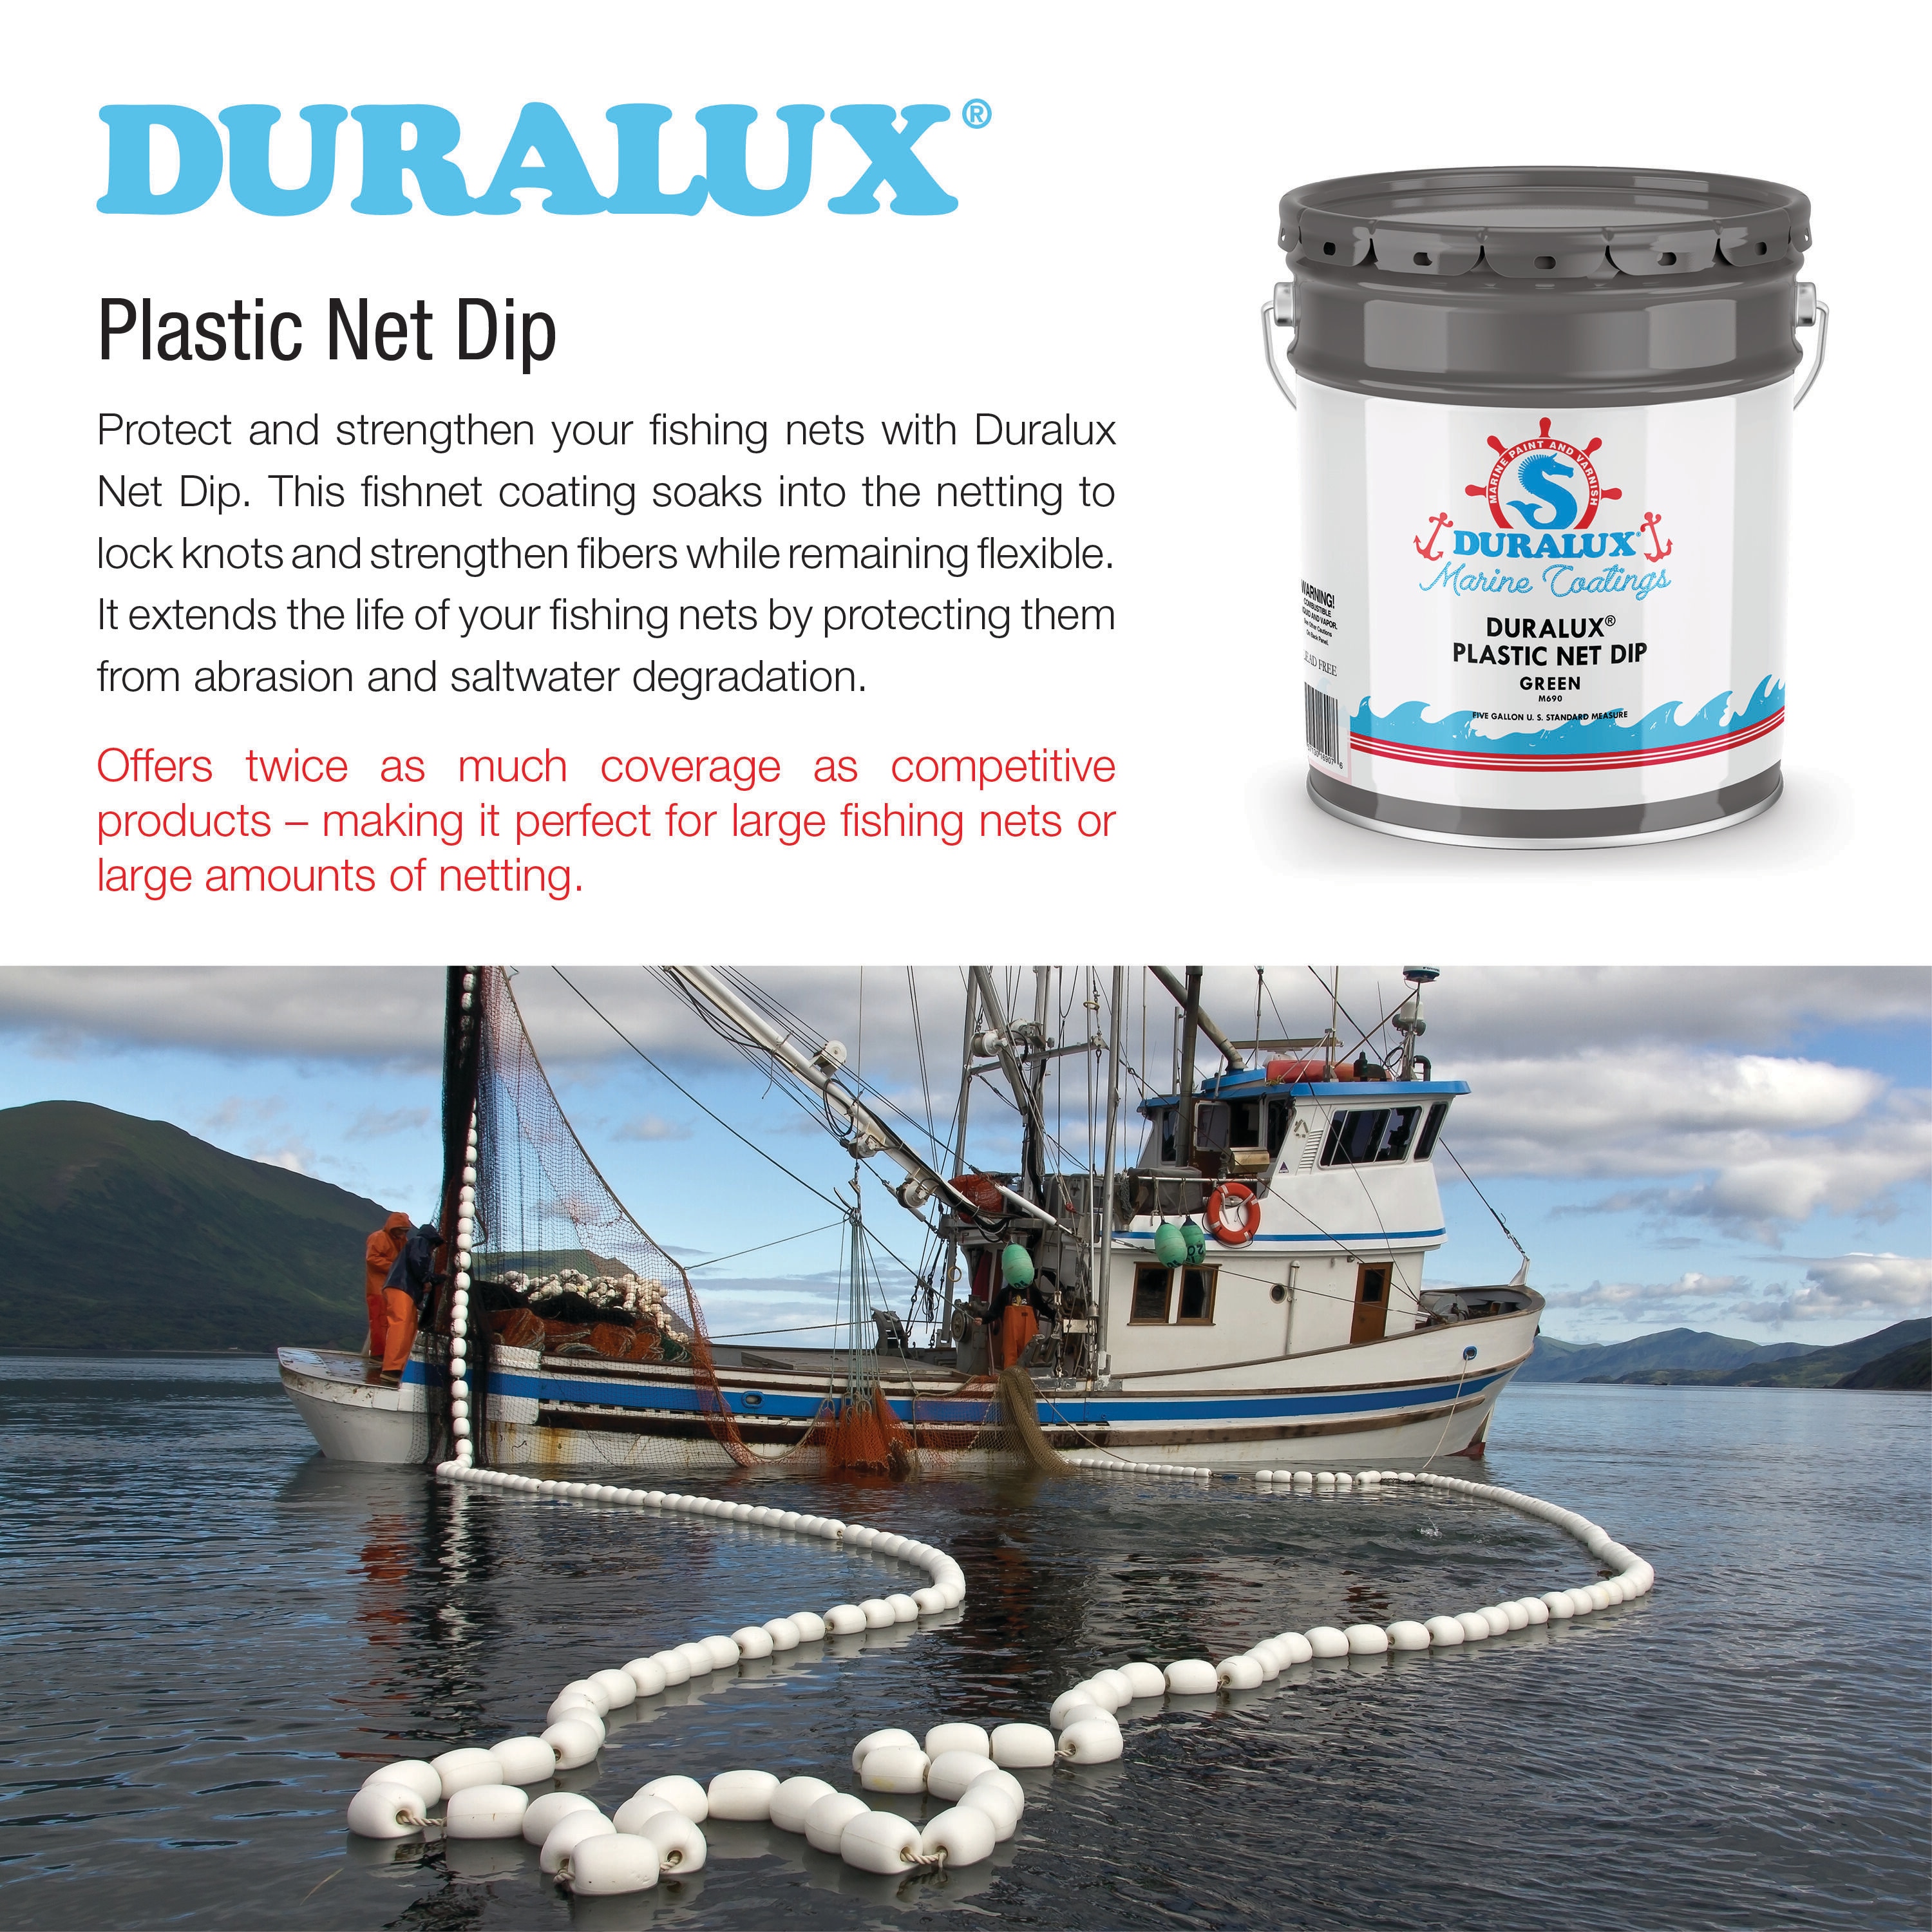 Duralux Gloss Green Oil-based Marine Paint (5-Gallon) at